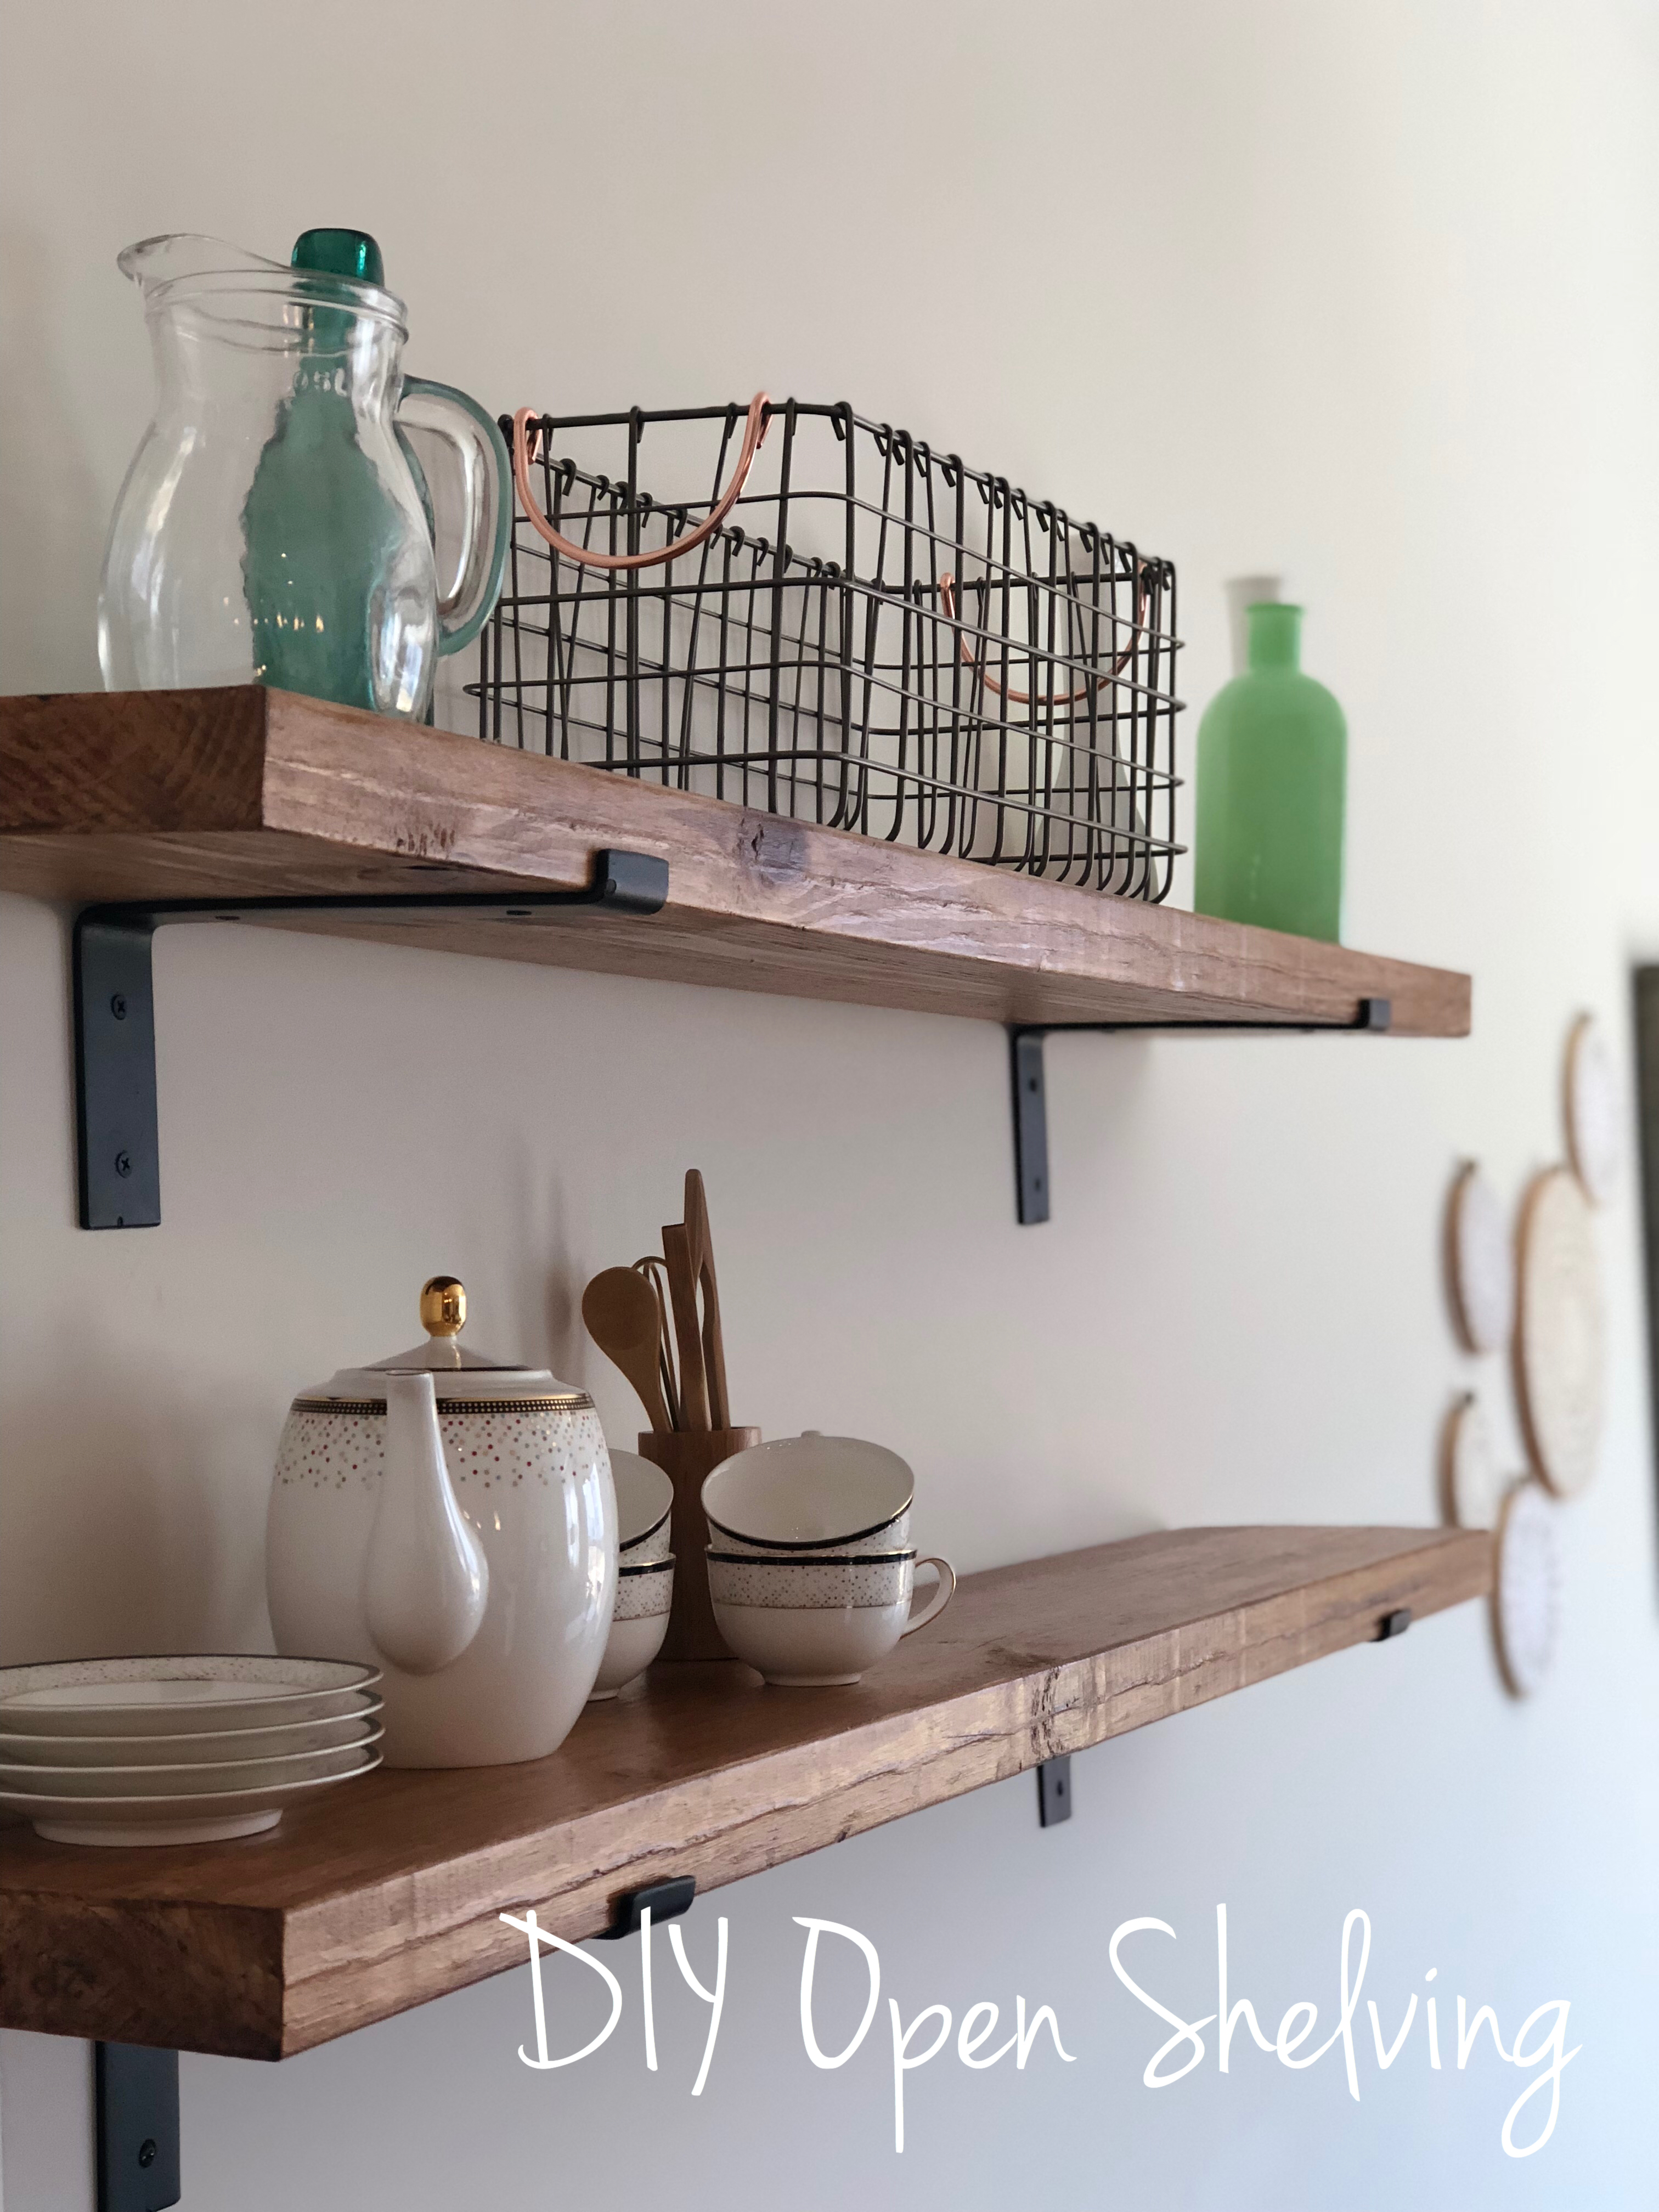 Diy Open Shelving Provident Home Design, How To Build Open Shelving In Kitchen